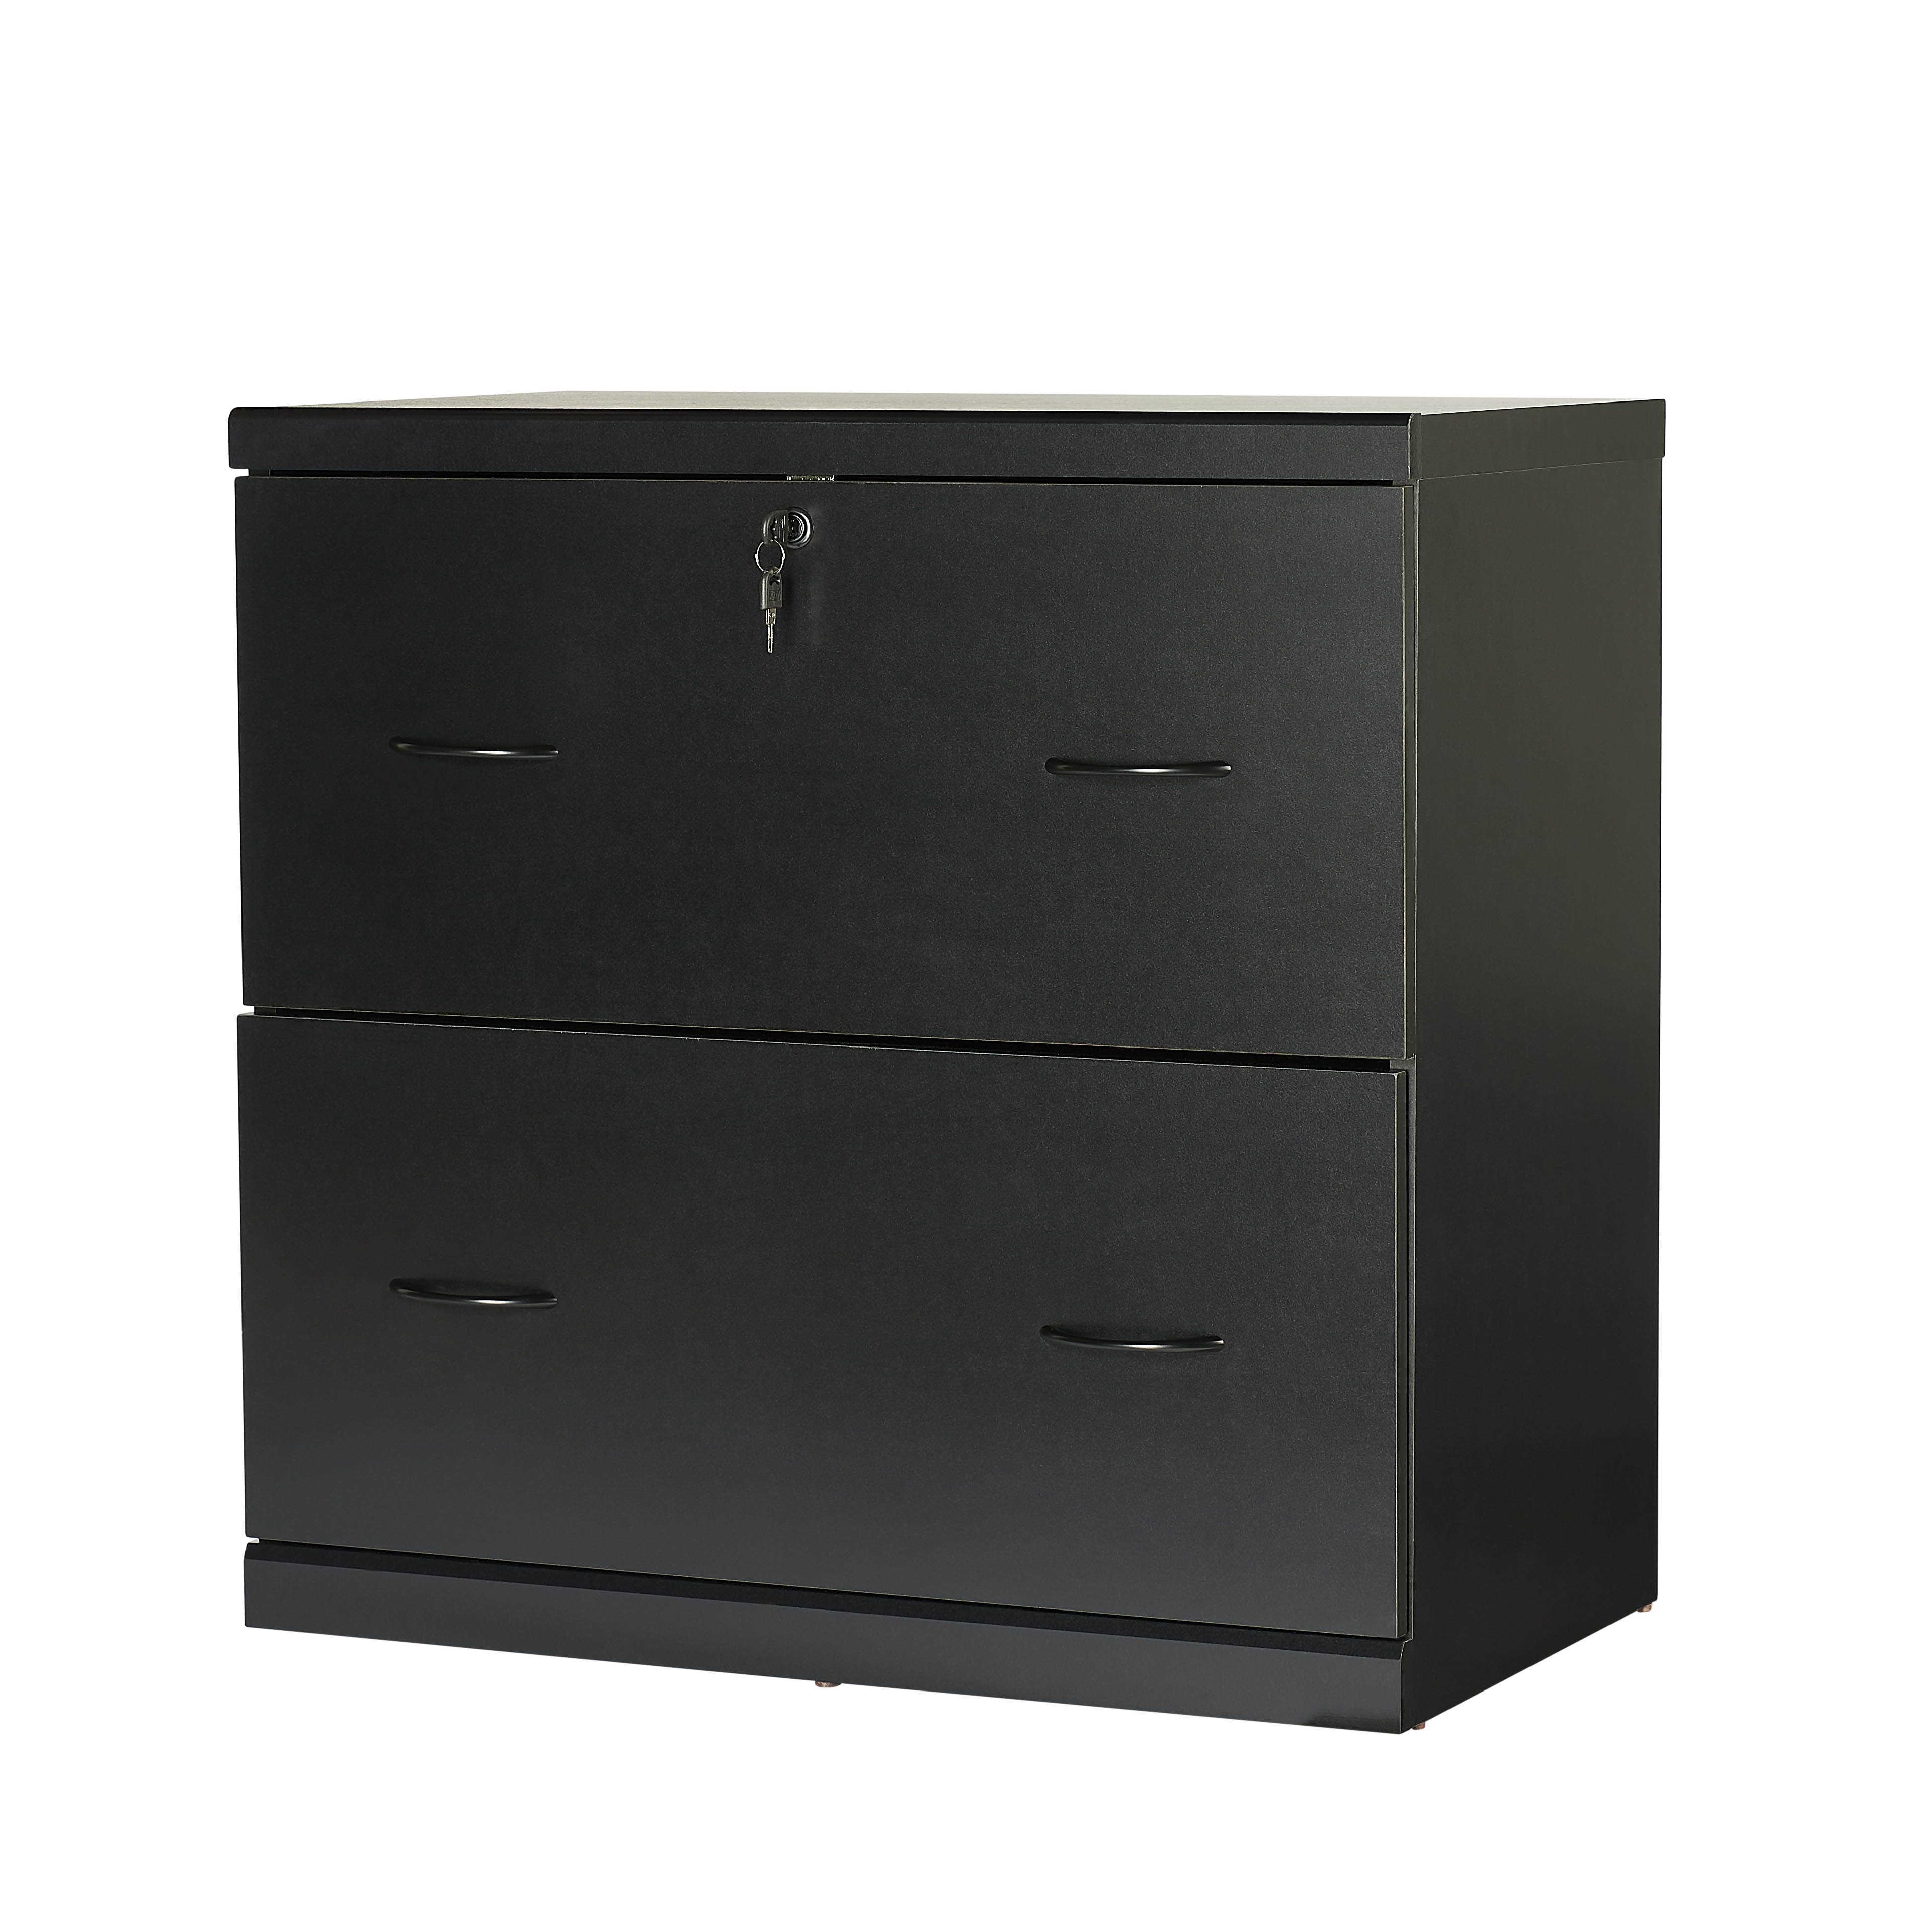 Mainstays 2 Drawer Lateral Locking File Cabinet Walmart with proportions 3840 X 3840